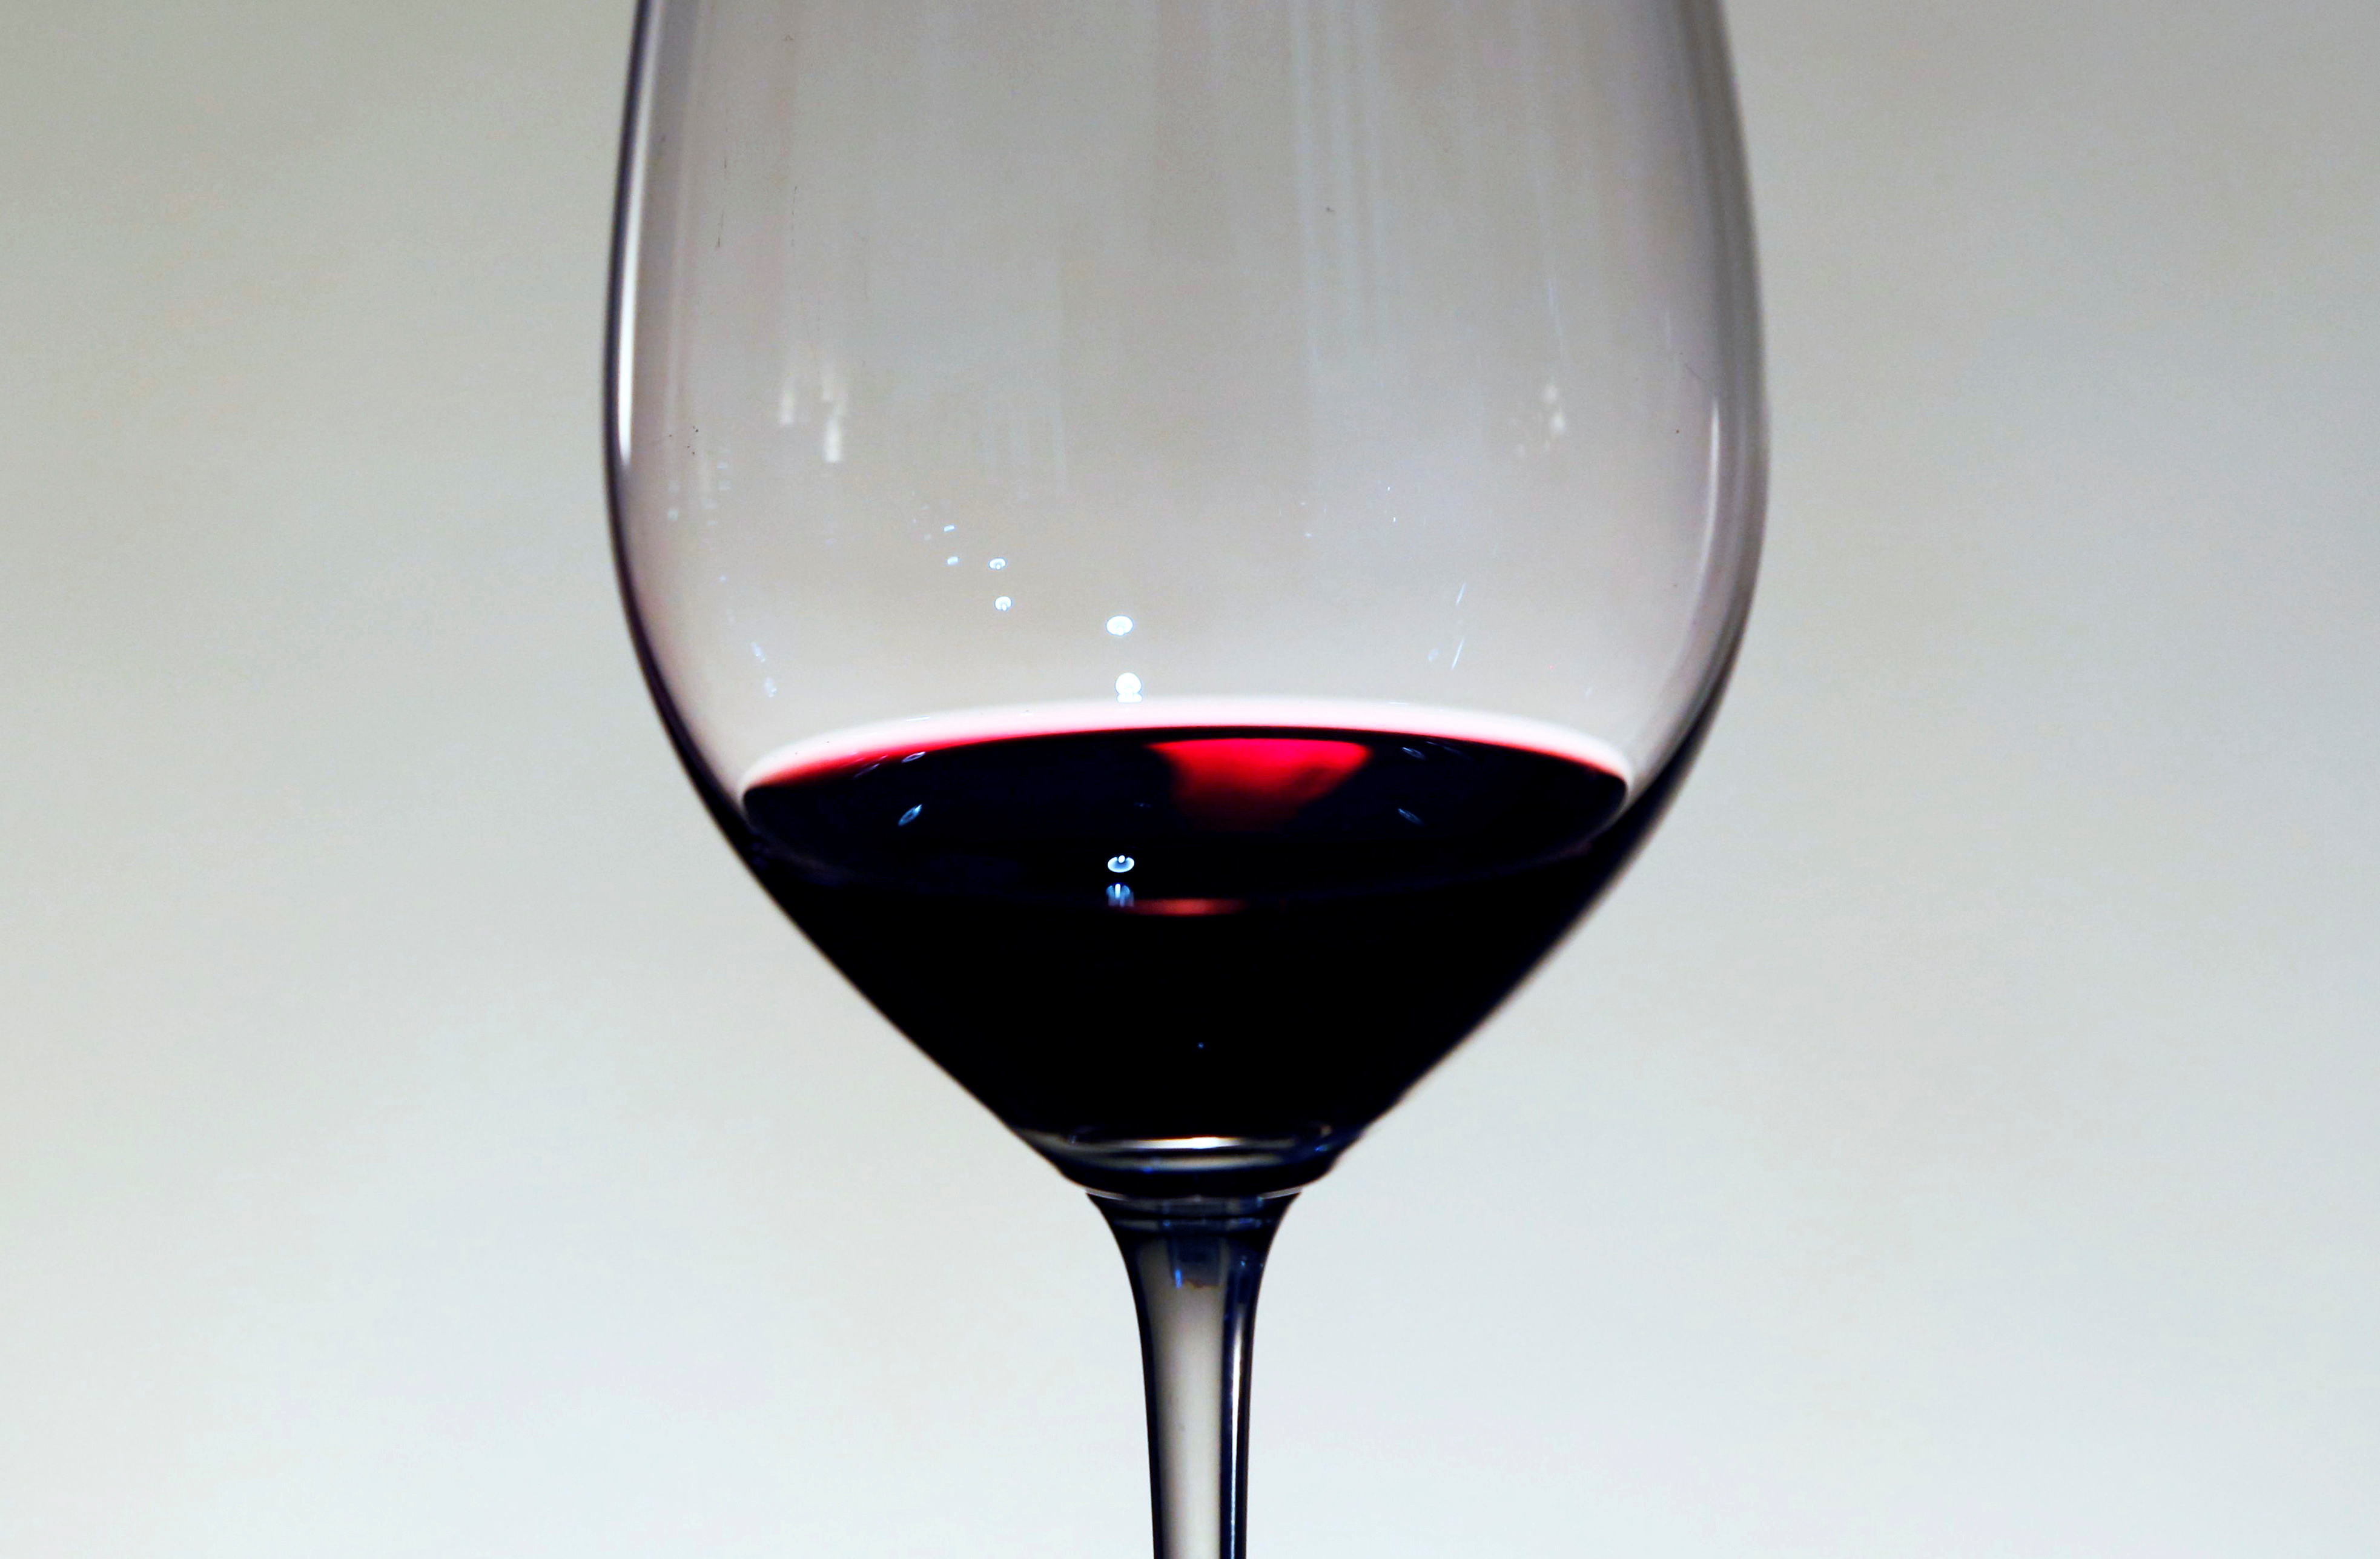 A glass of red wine is displayed at the Chateau La Louviere in Leognan